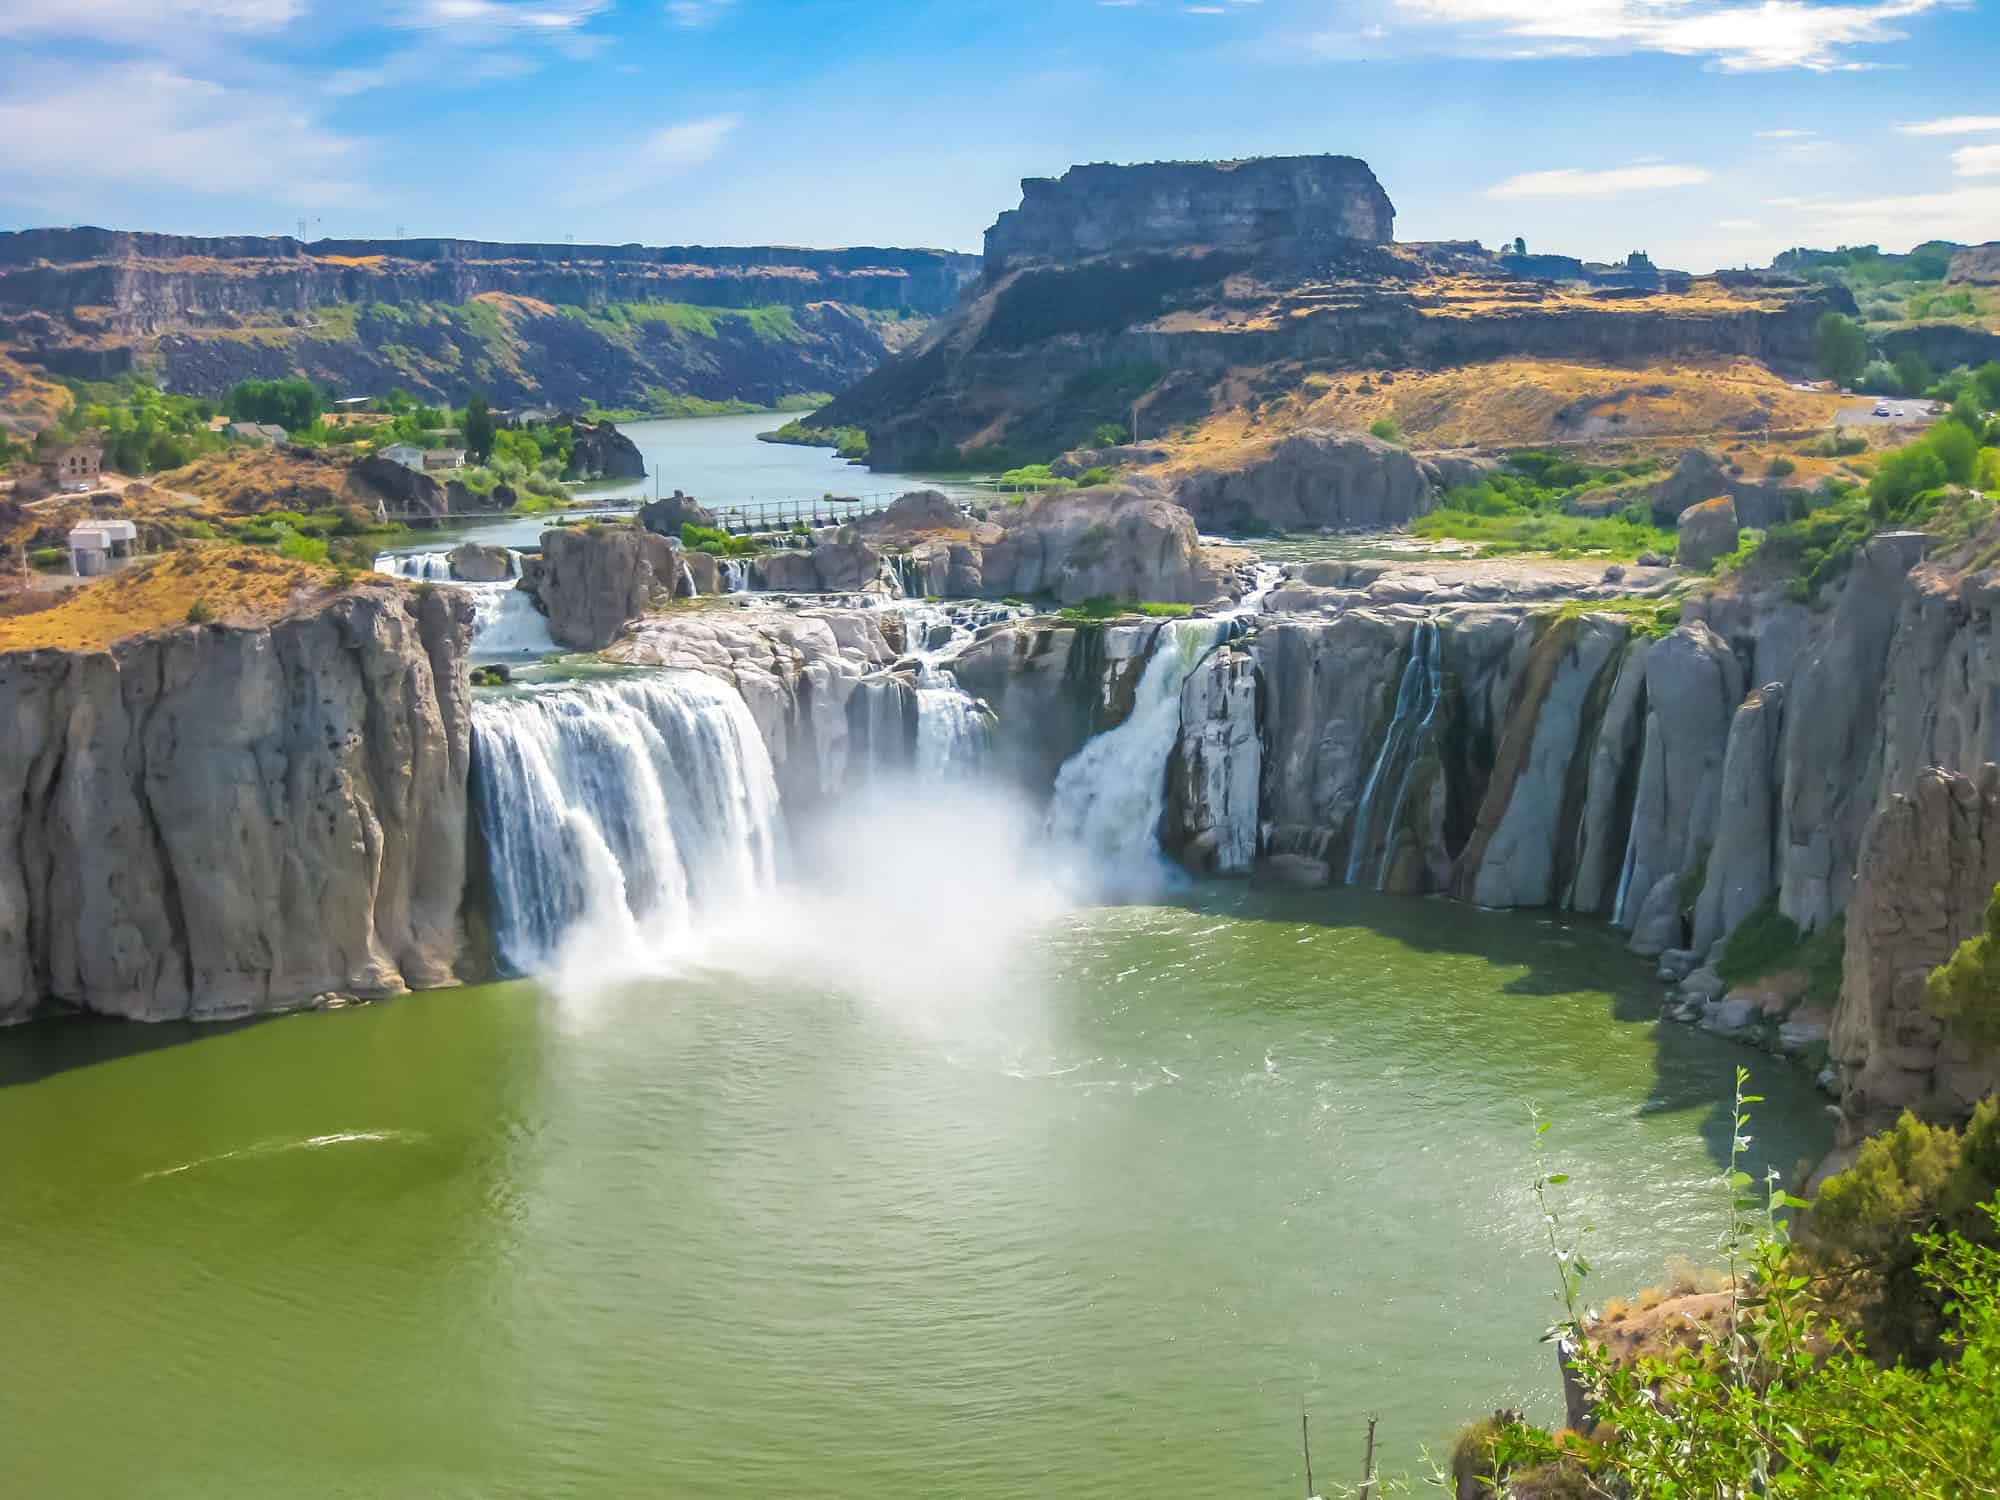 <p>The state is home to Sun Valley Resort, the top ski resort in North America, and The “Niagara Falls of the West” Shoshone Falls. It is taller than its New York cousin Niagara Falls and much less crowded. </p> <p>“Southwest Idaho and Idaho itself offer so much outdoor-recreation accessibility from mountain biking and hiking to whitewater rafting and standup paddleboarding,” says Melissa Cleland, Southwest Idaho Travel Association. “It’s great to have options like Roaring Springs and Wahooz where visitors can take their family to play whether they’re indoors or outdoors.</p>